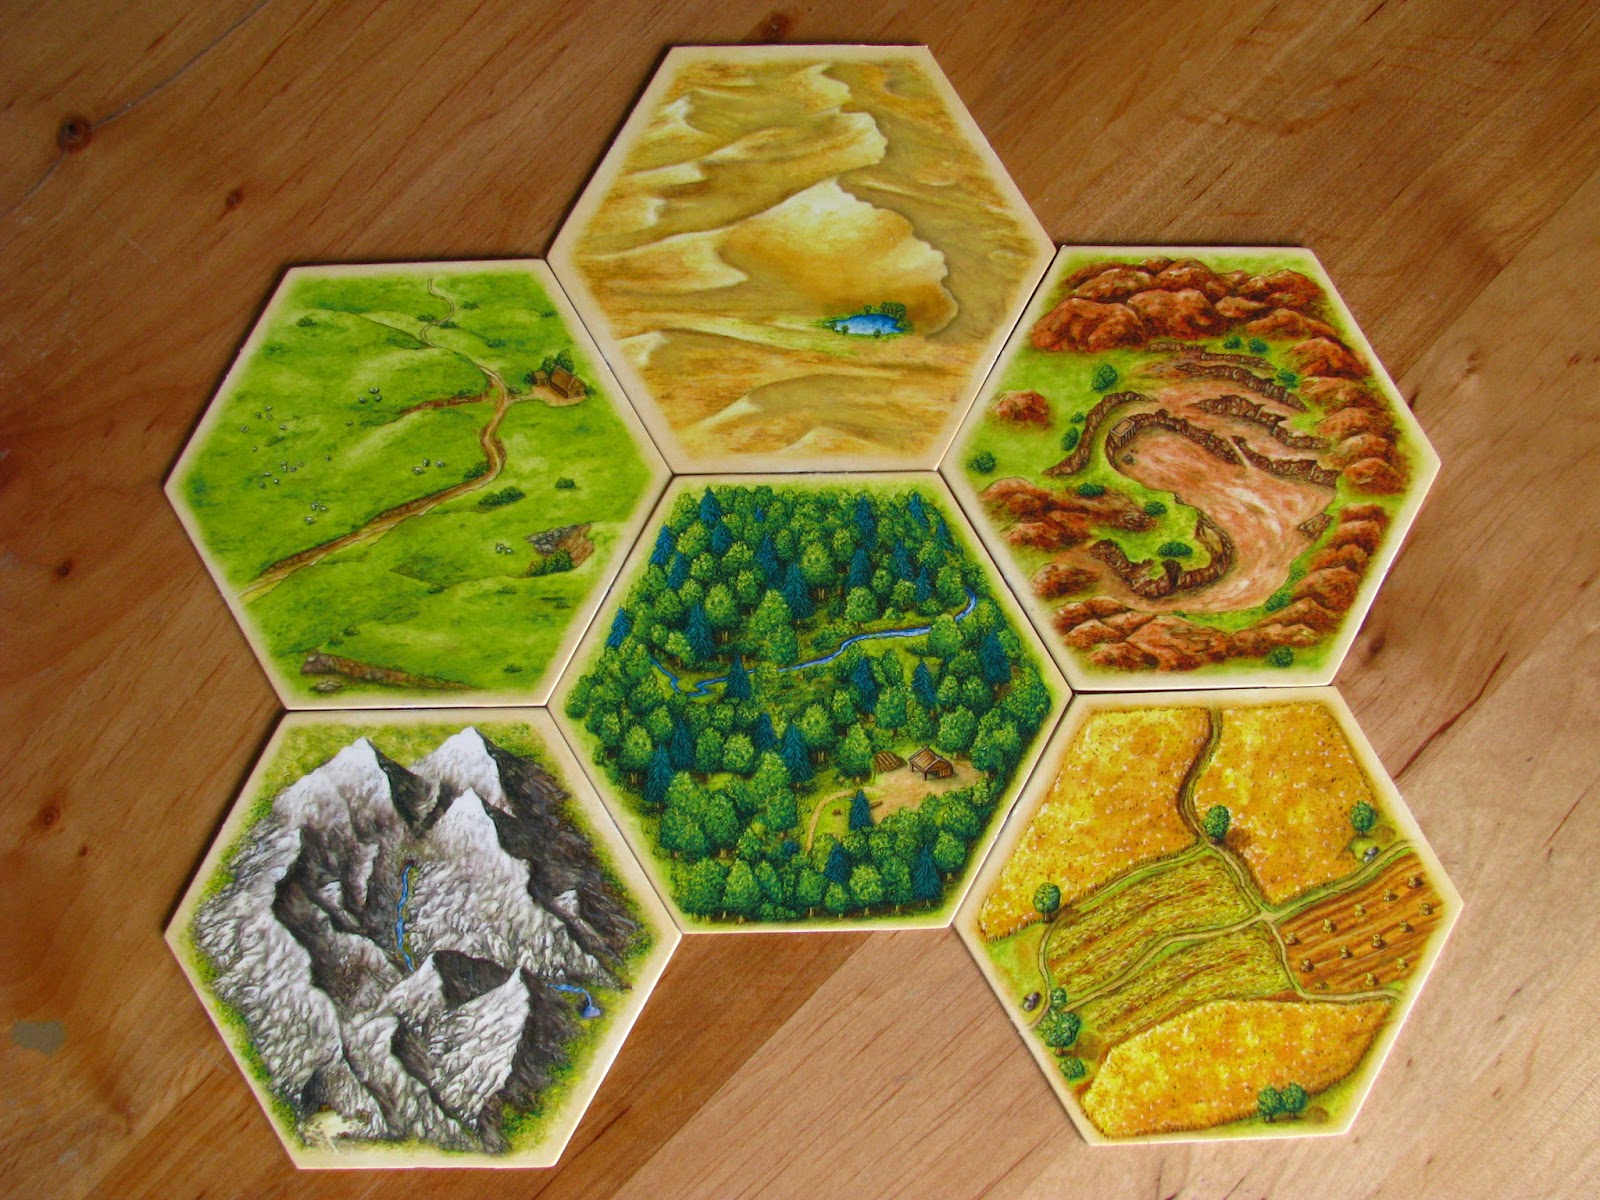 The Settlers of Catan. 